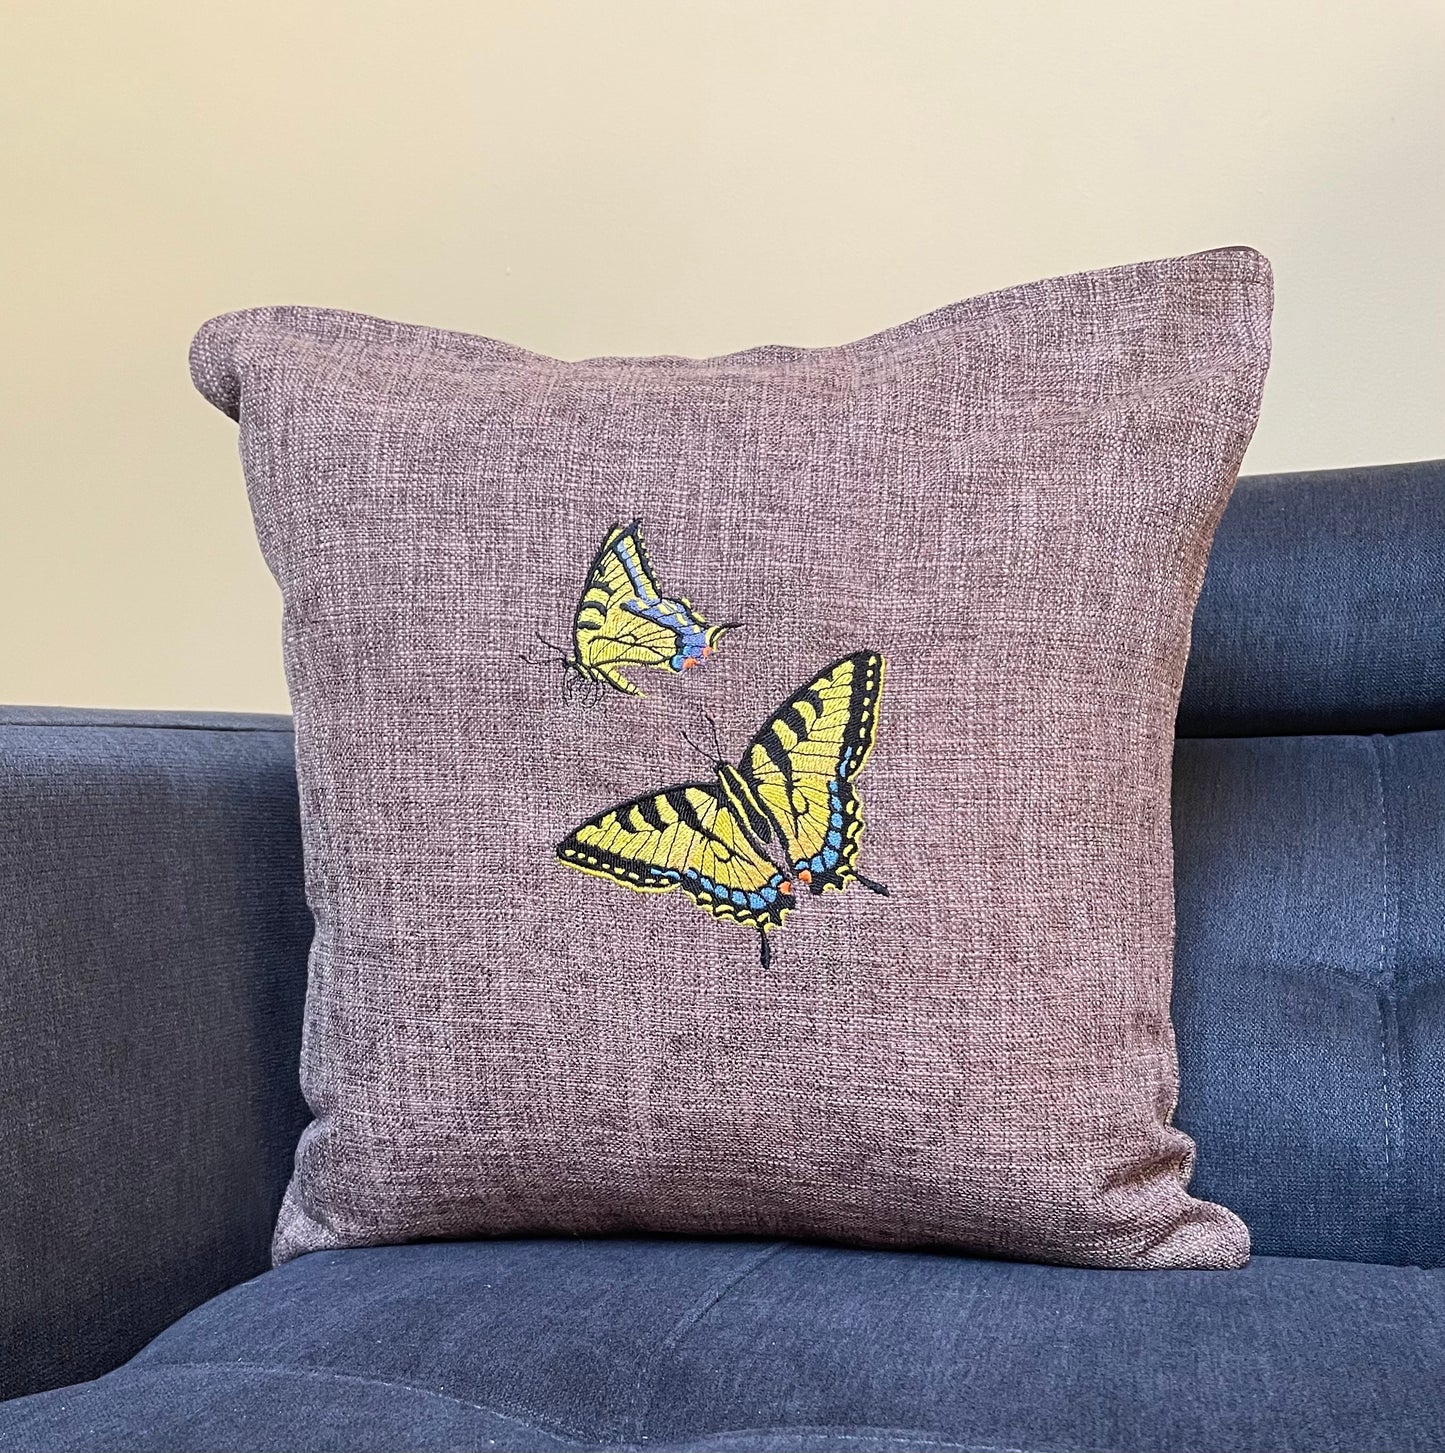 Swallowtail Butterfly Embroidered Throw Pillow Cover 16" x 16" Cotton